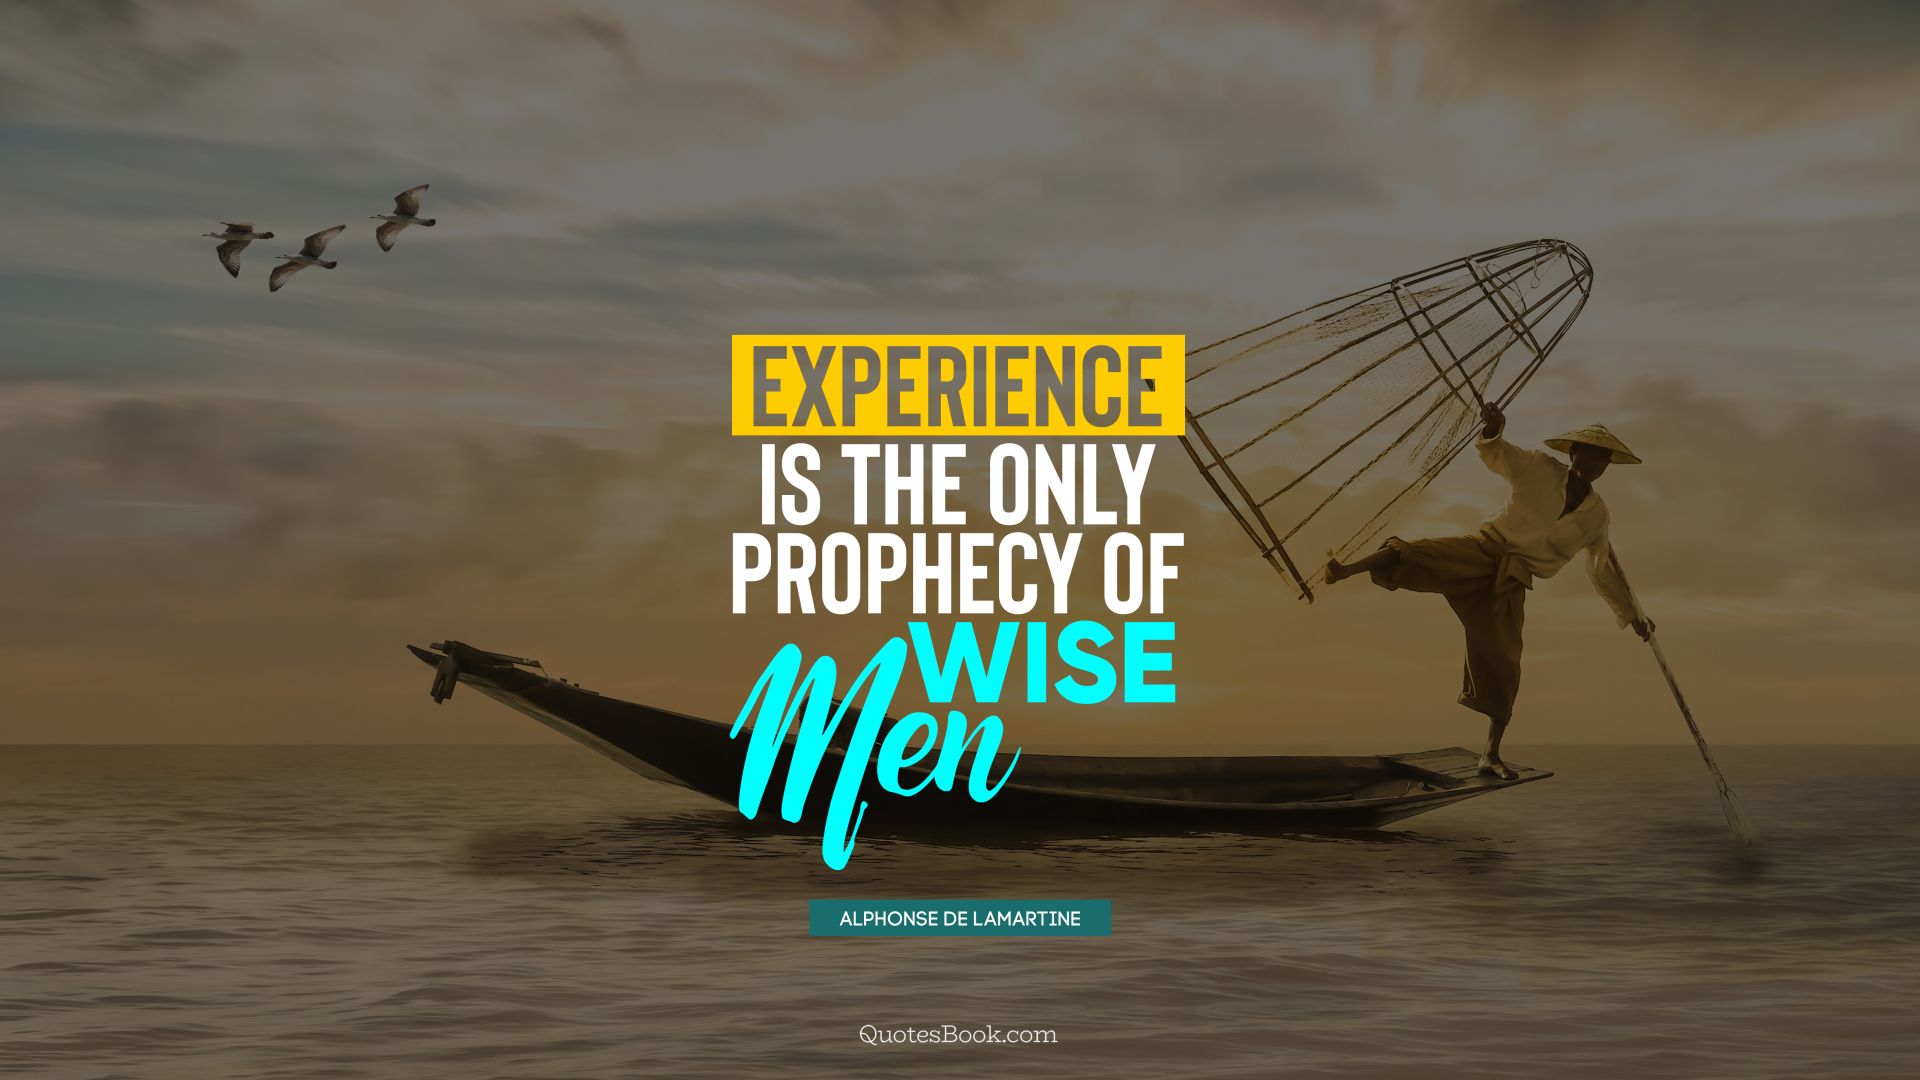 Experience is the only prophecy of wise men. - Quote by Alphonse de Lamartine